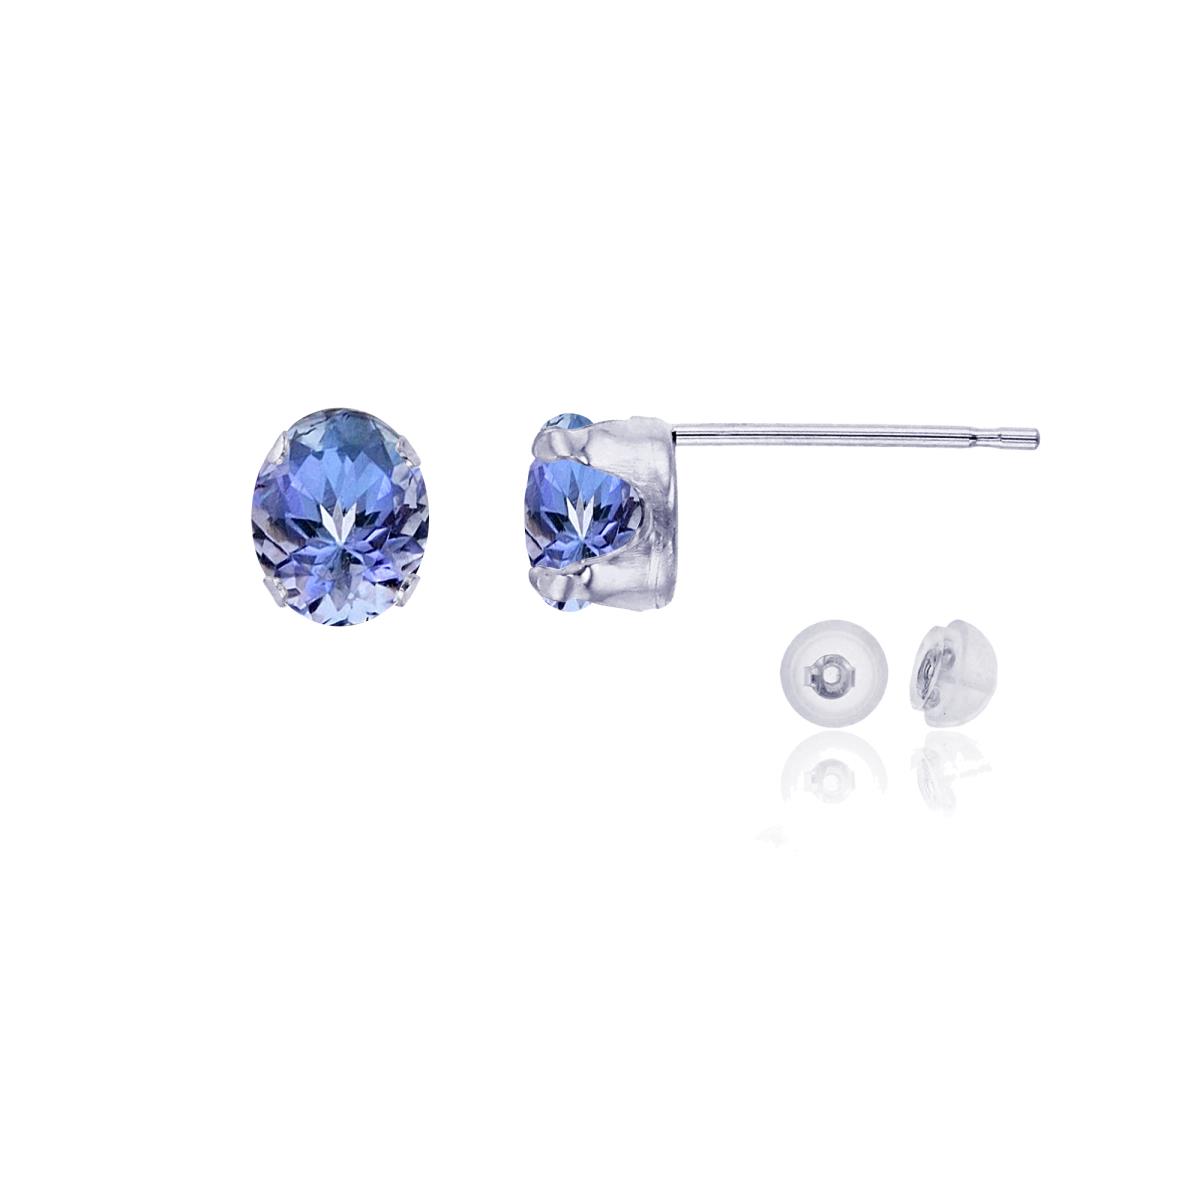 14K White Gold 6x4mm Oval Tanzanite Stud Earring with Silicone Back